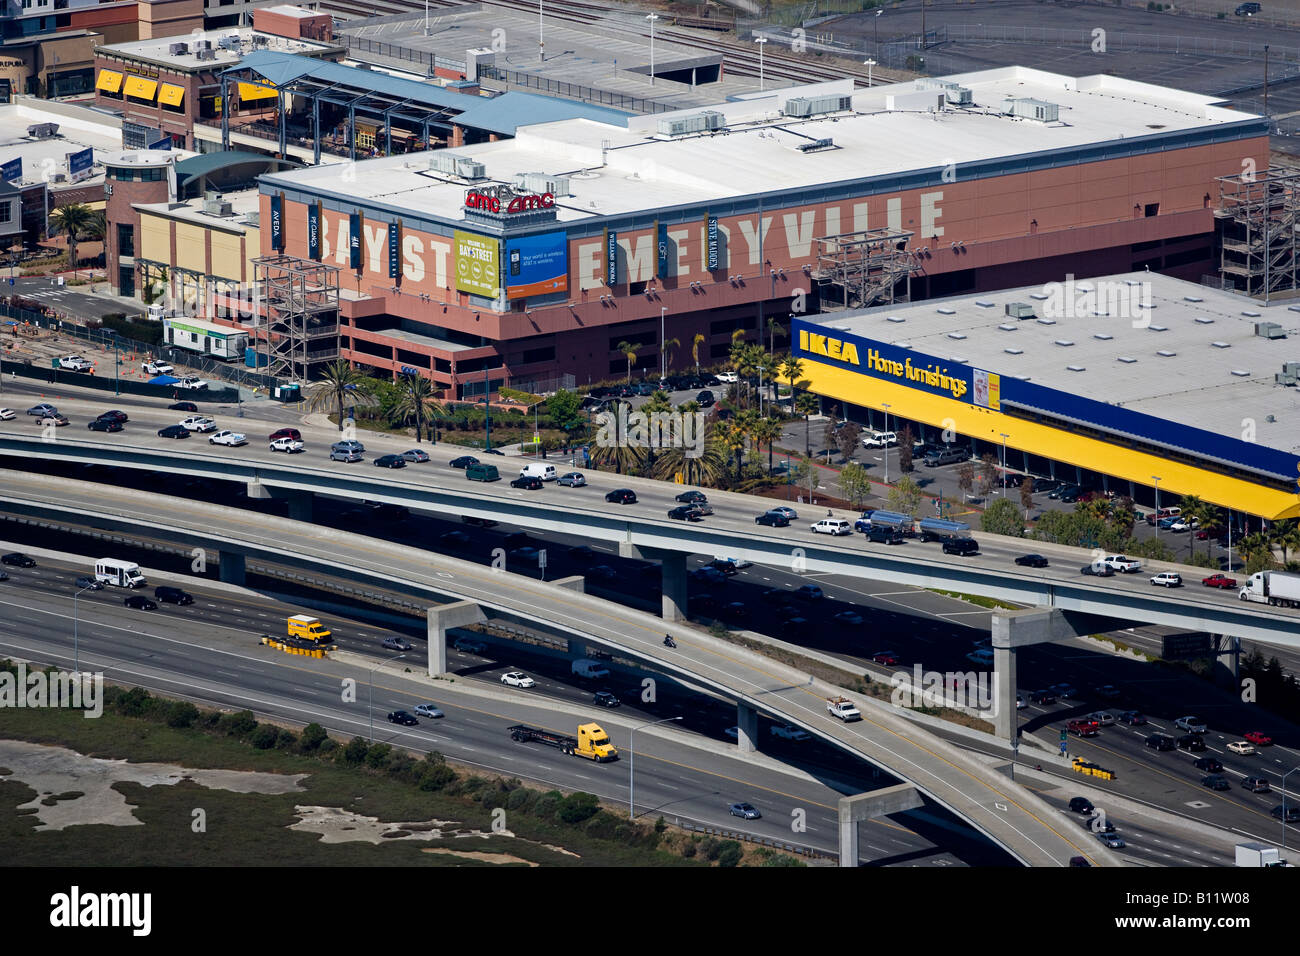 aerial above Emeryville Bay St retail district including Ikea and AMC theaters I 80 in foreground Stock Photo